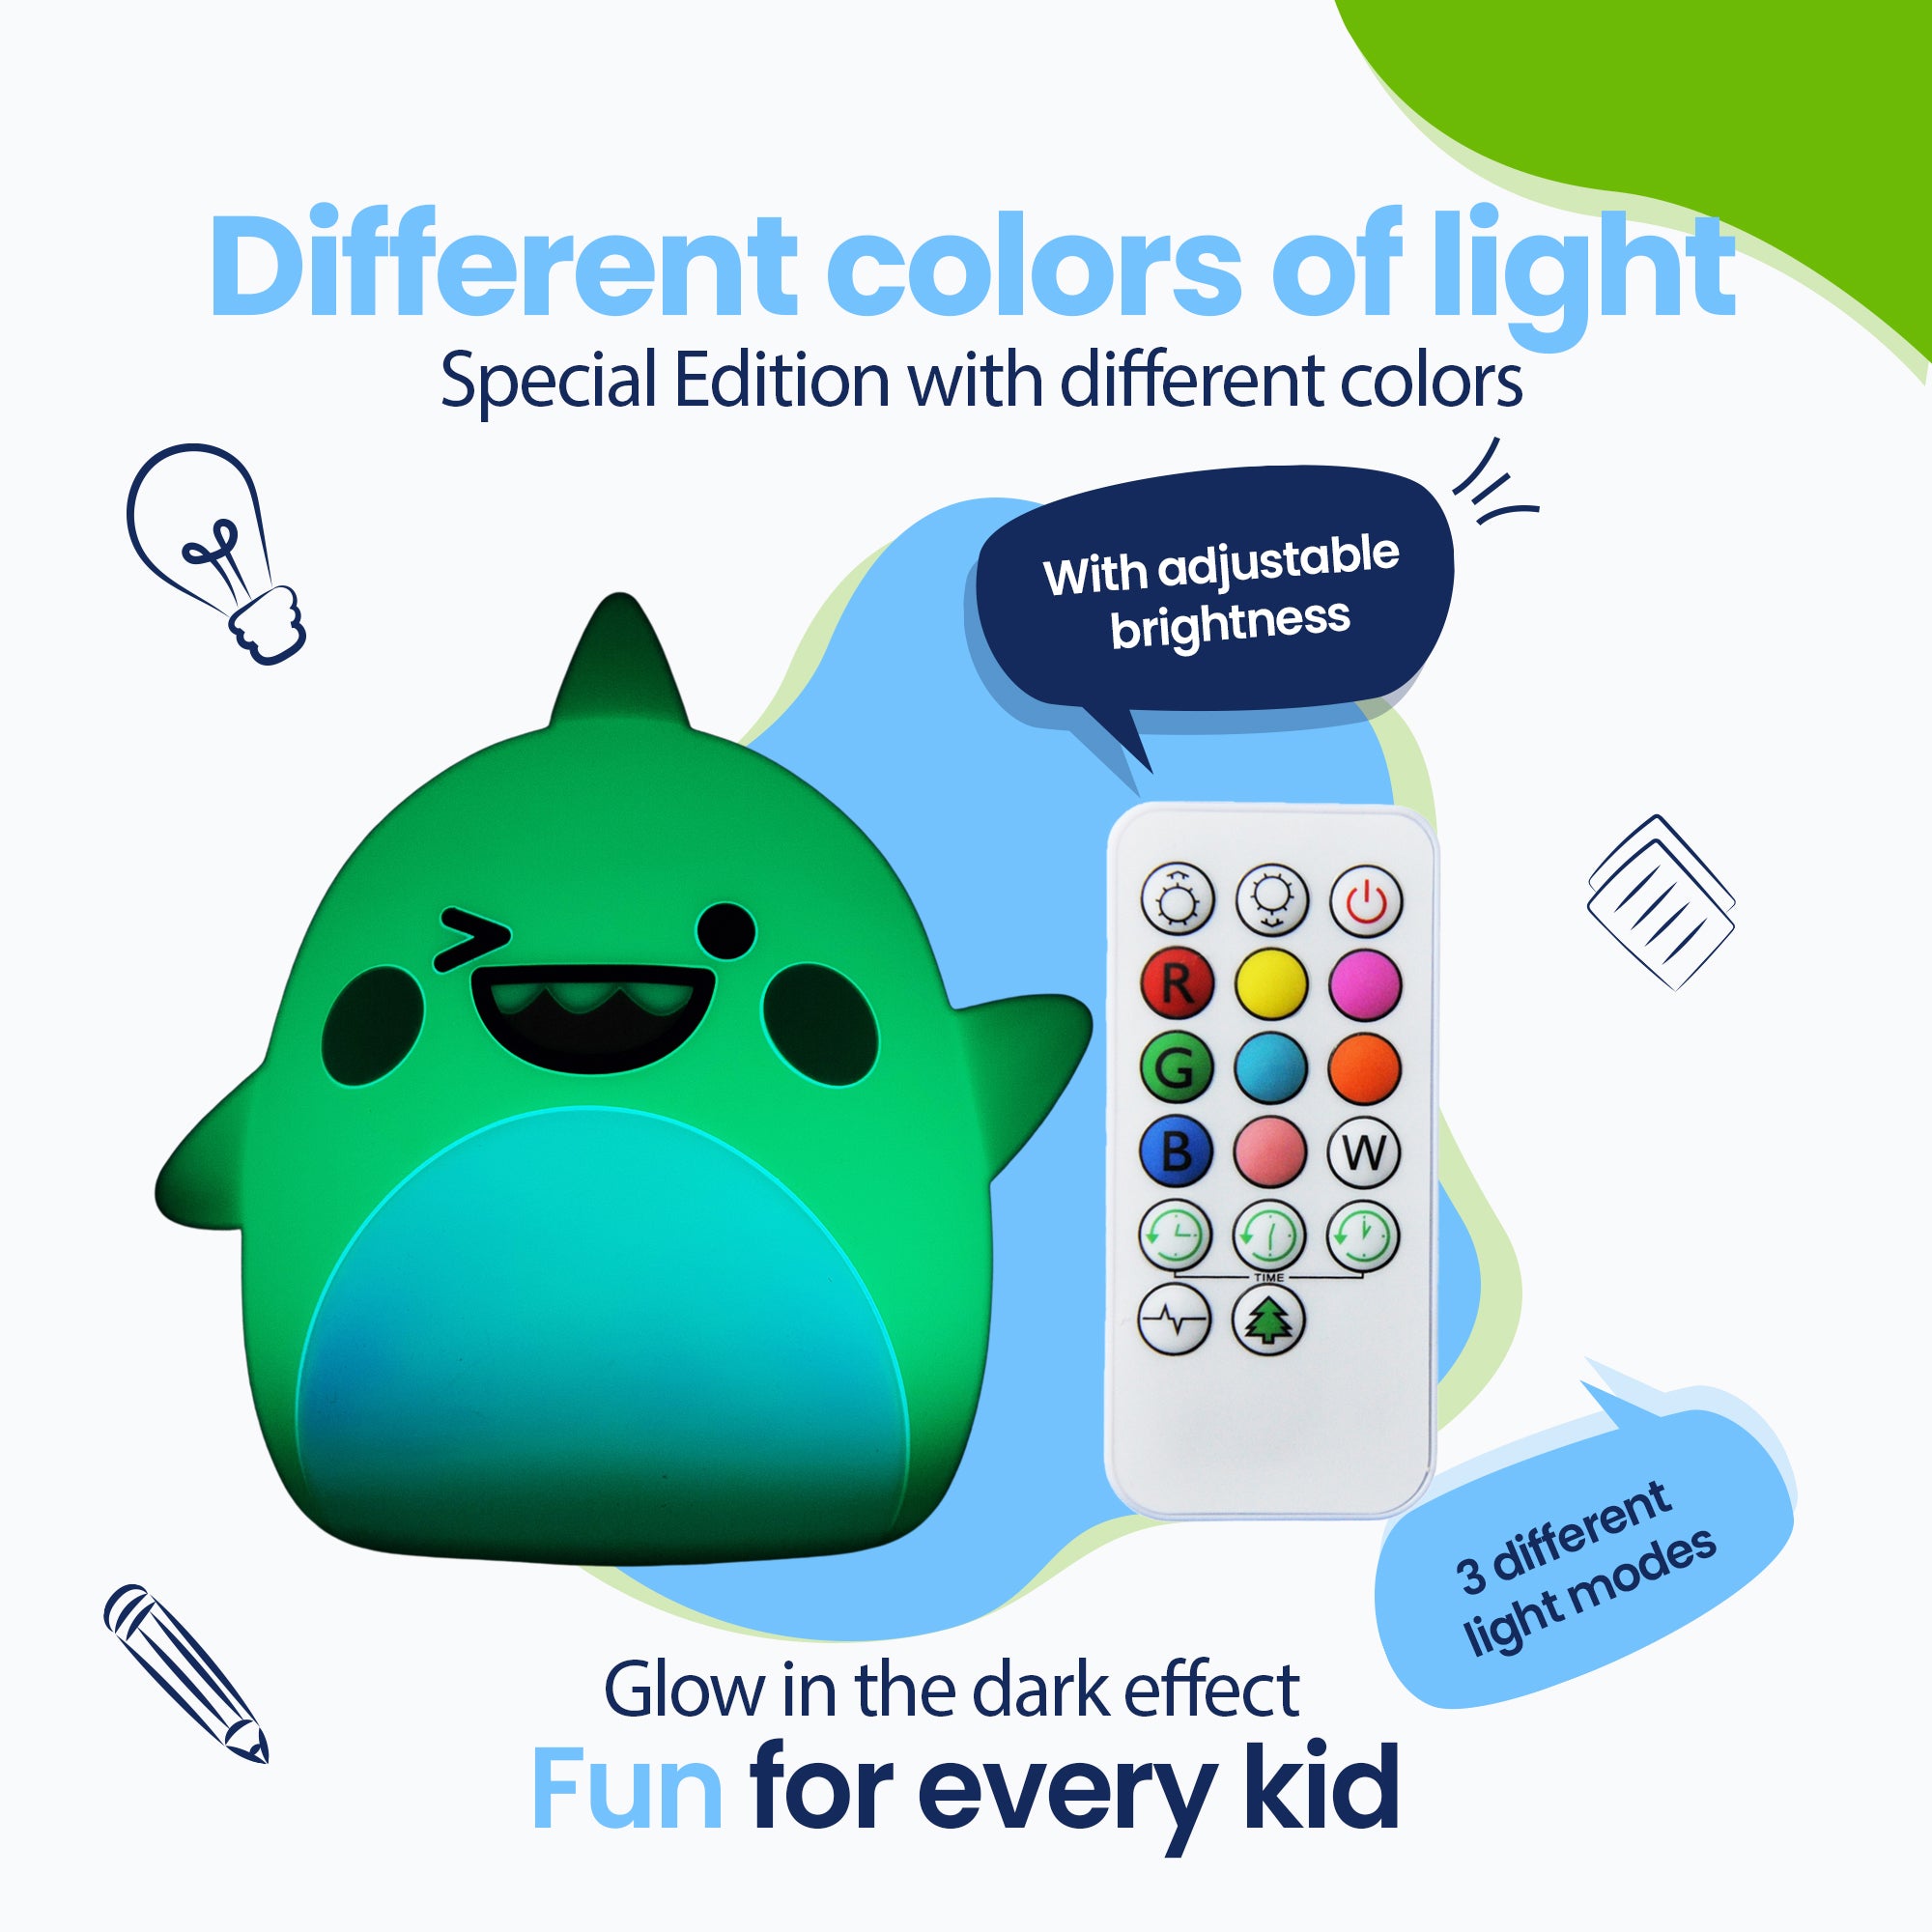 Different colors of light - Special Edition with different colors - Glow in the Dark Effect - 3 different light beaches - Fun for every child